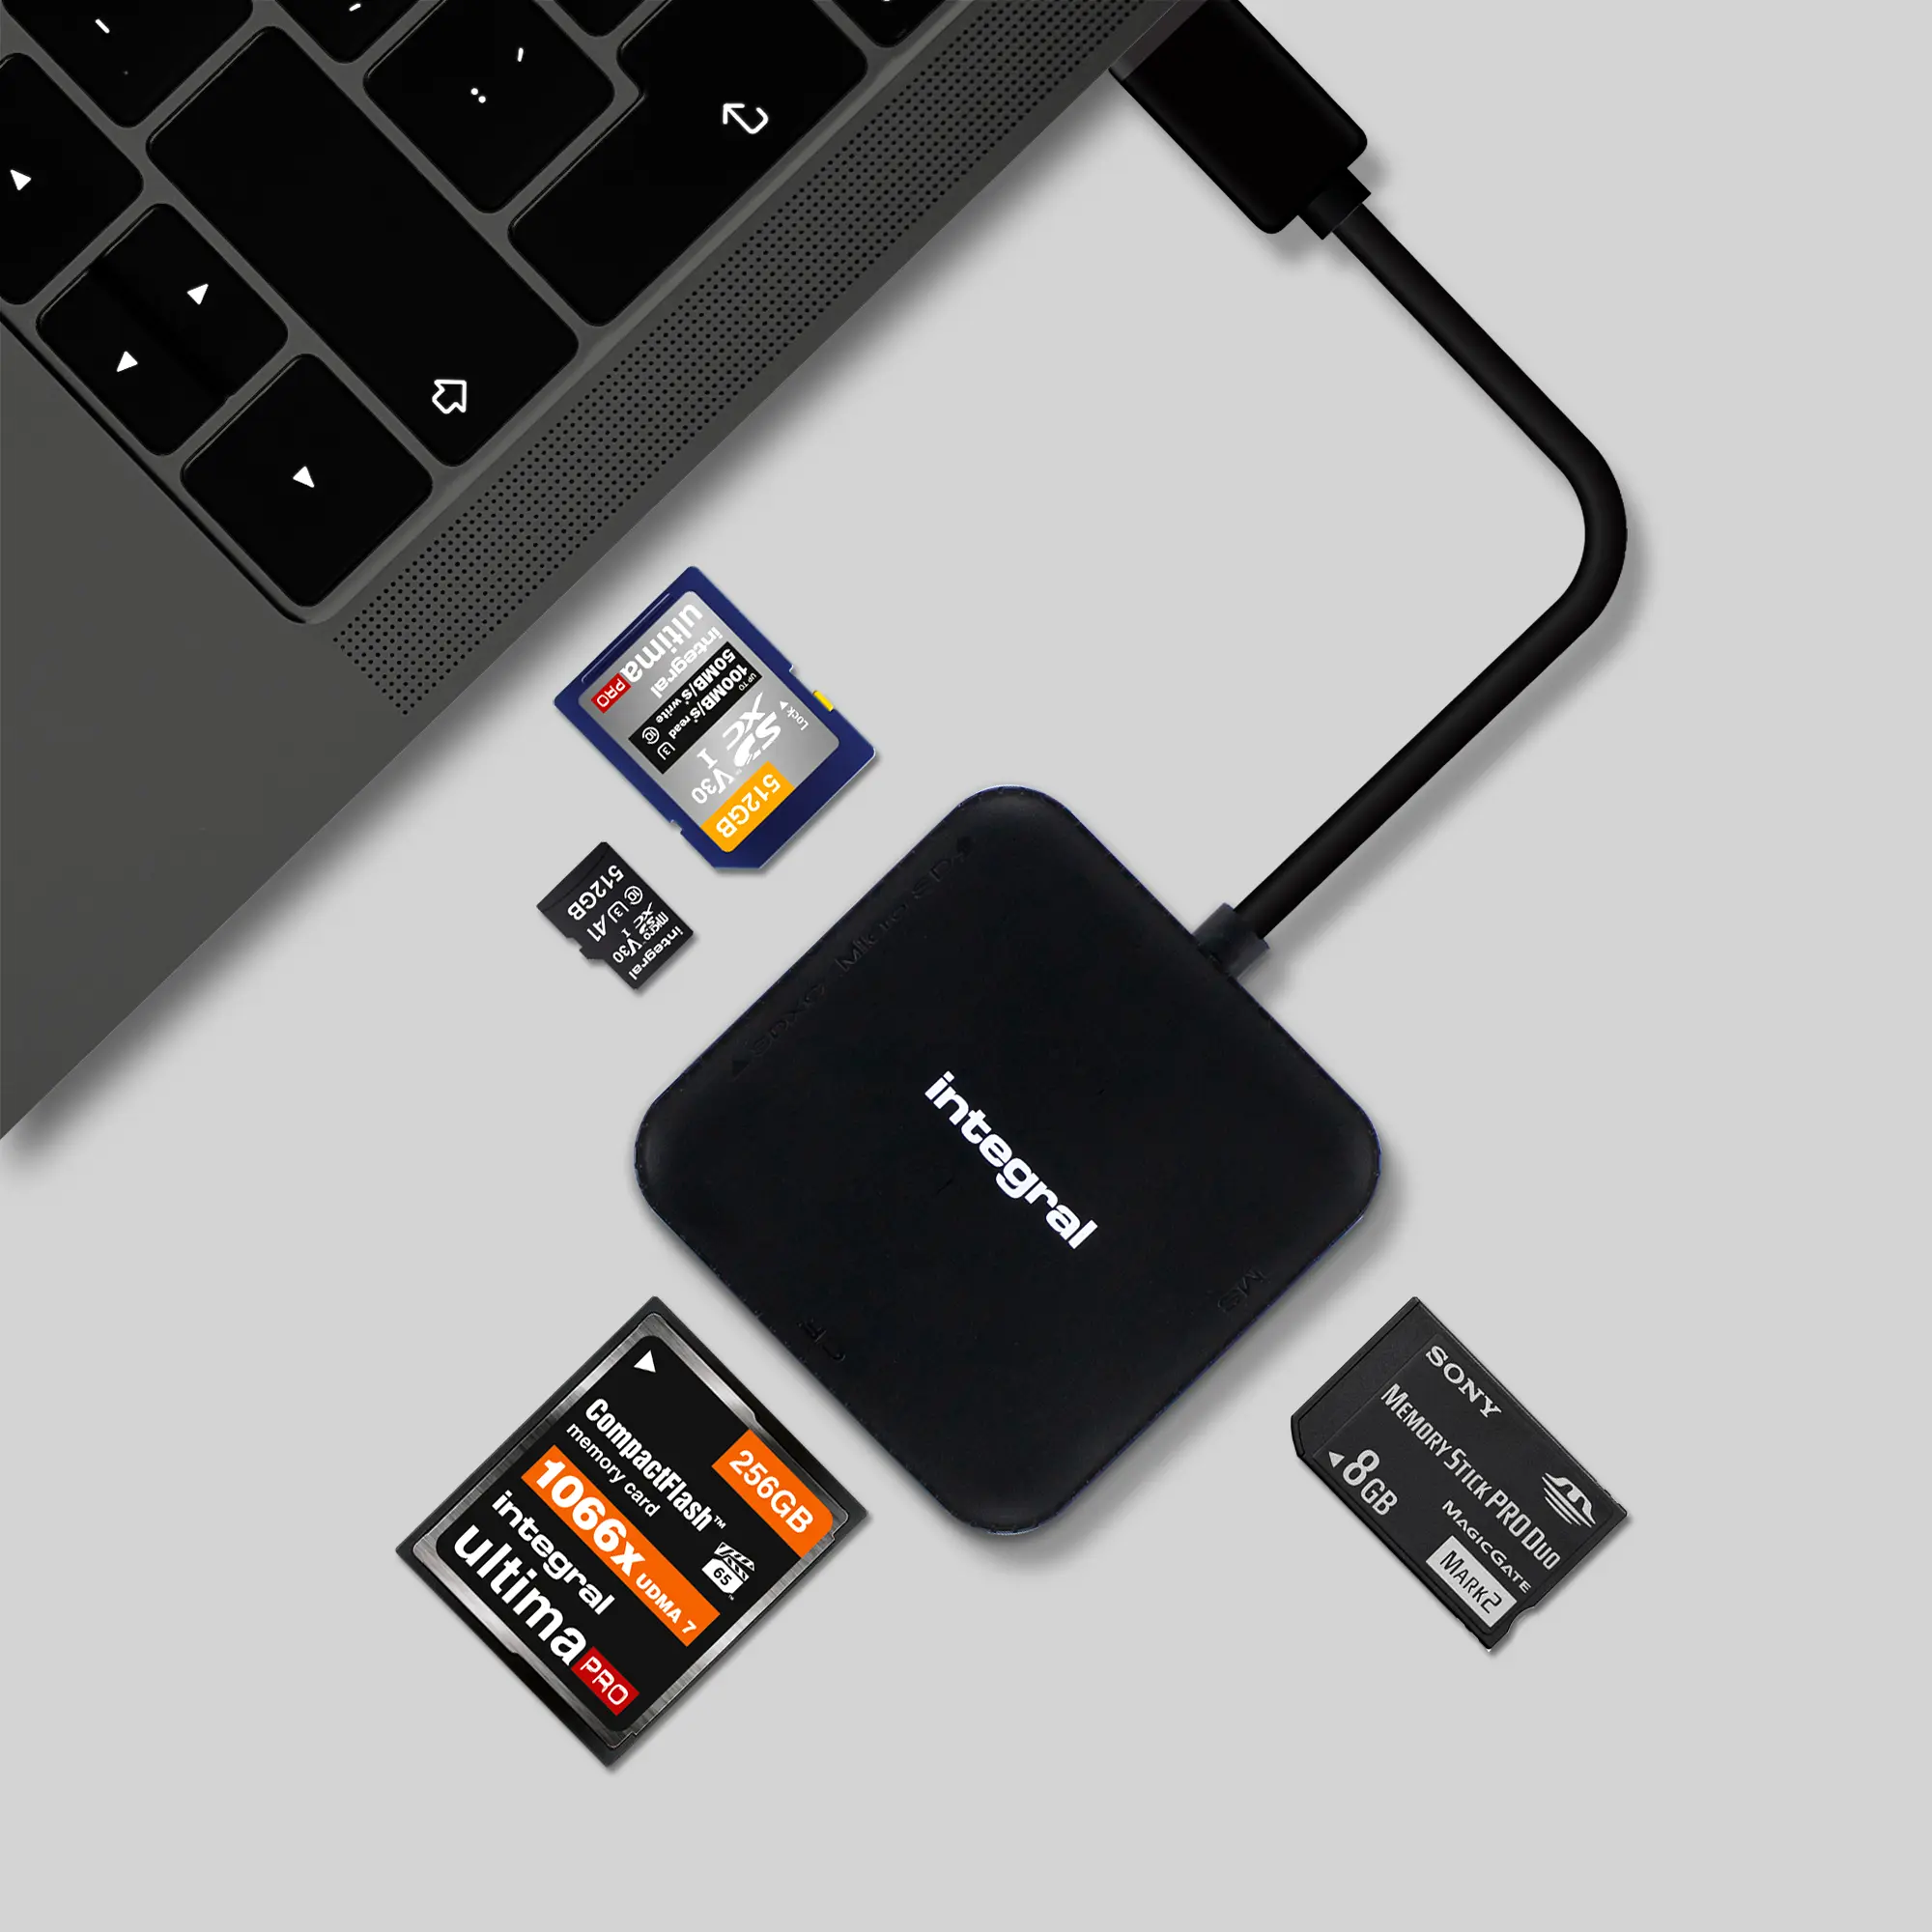 All-In-One Multi Slot USB-C 3.0 Memory Card Reader